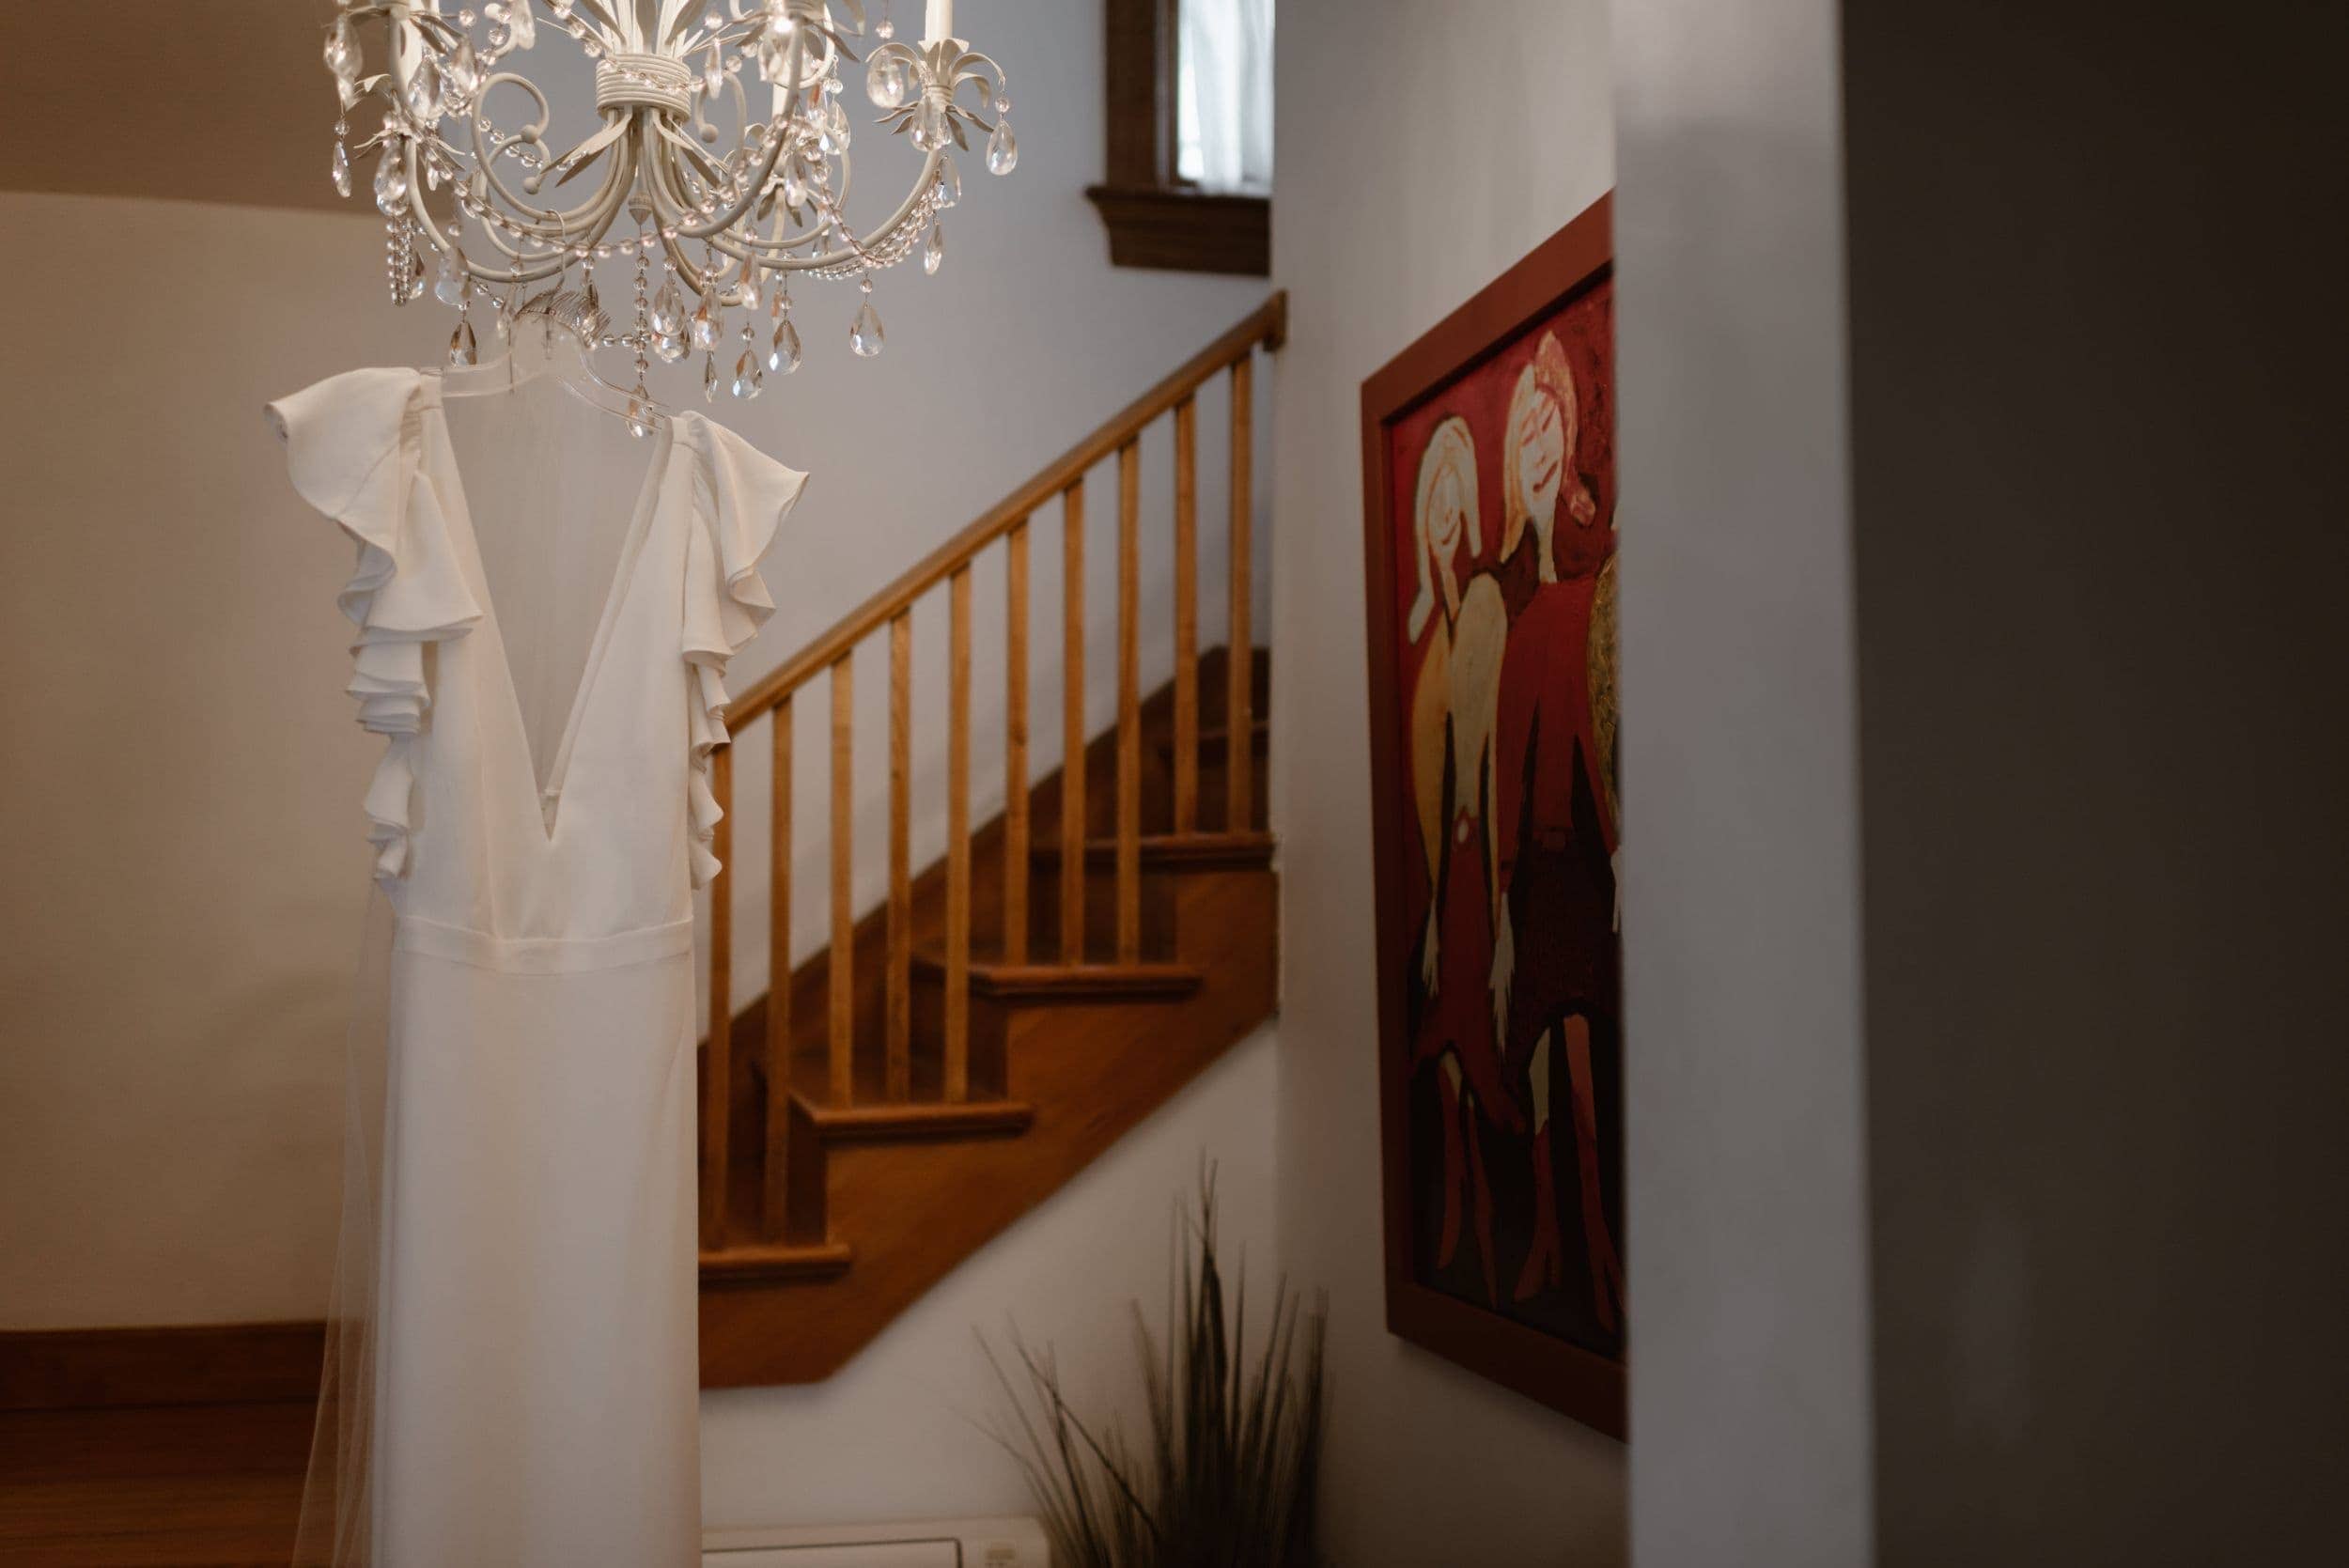 Bride's custom, white wedding dress hanging from a chandelier in Airbnb.